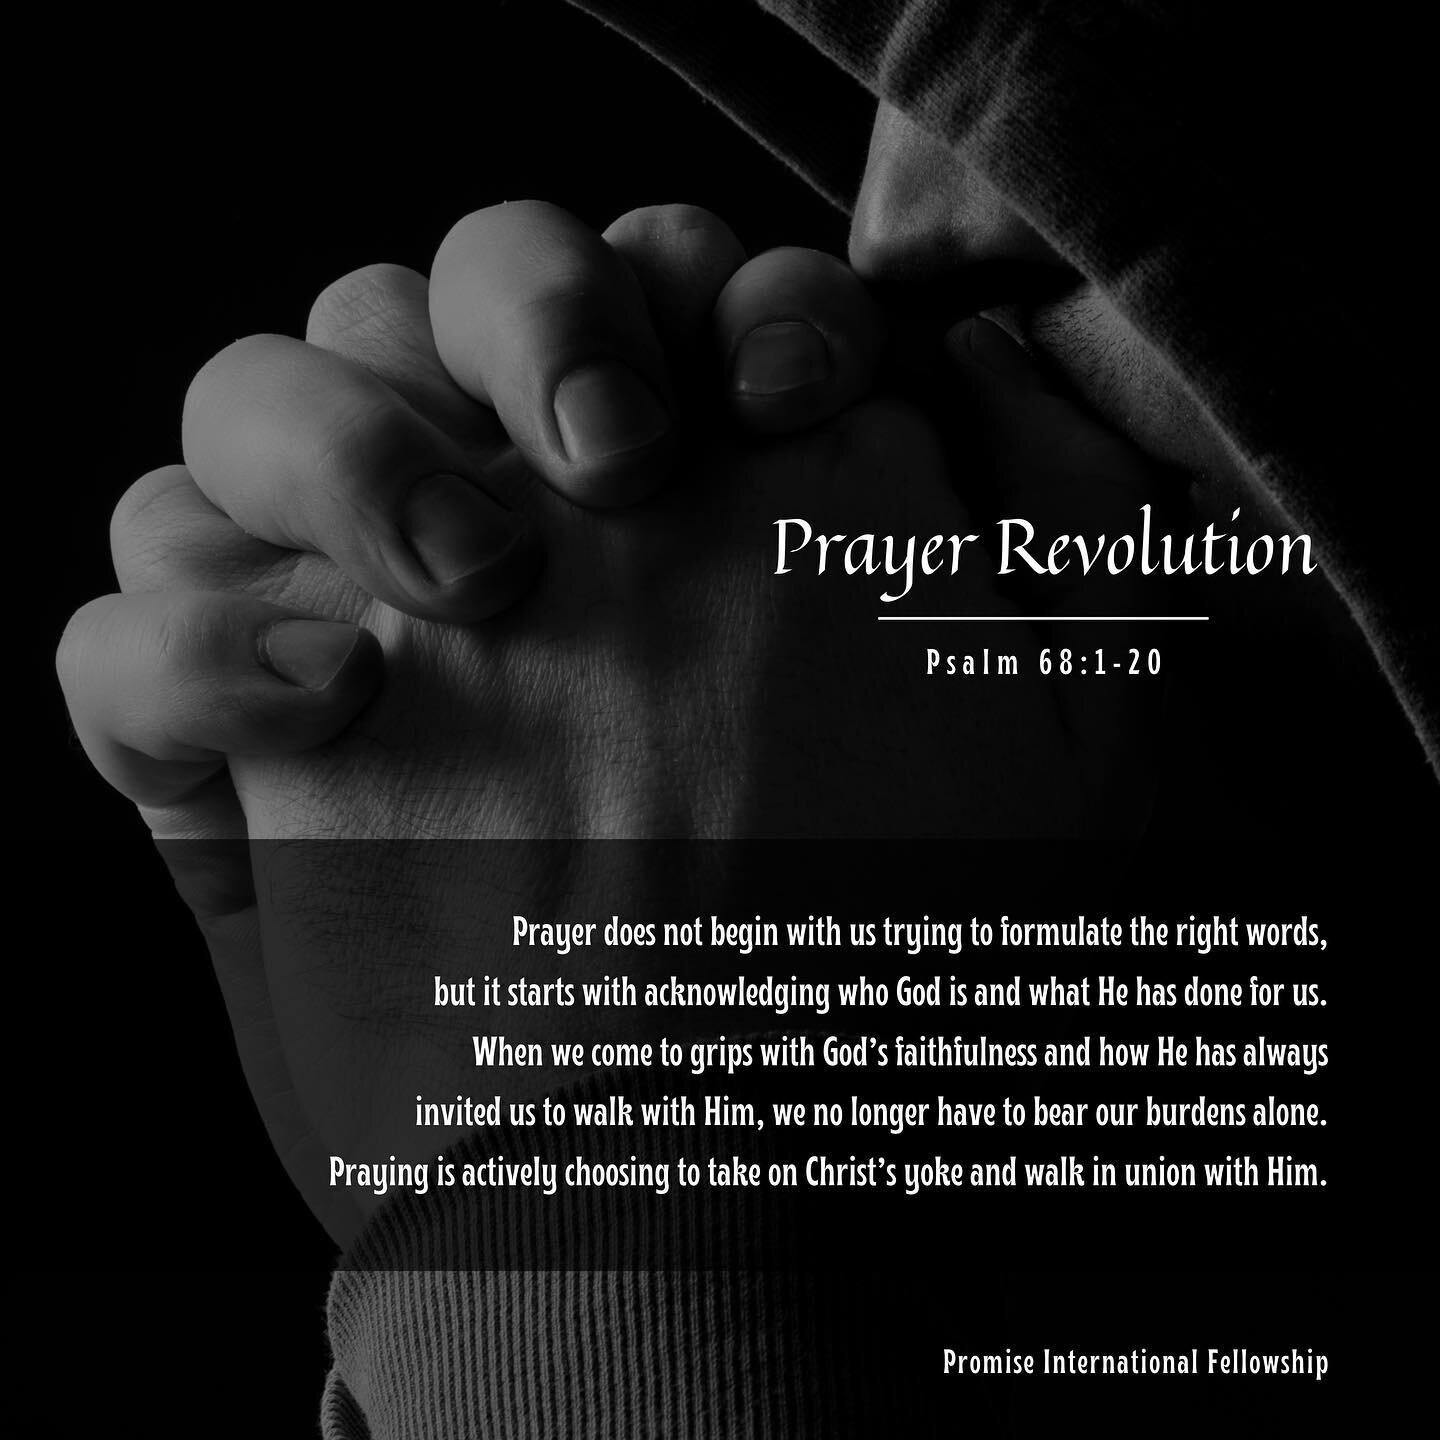 Prayer Revolution &ldquo;Who do you think you&rsquo;re talking to&rdquo;
Psalm 68:1-20